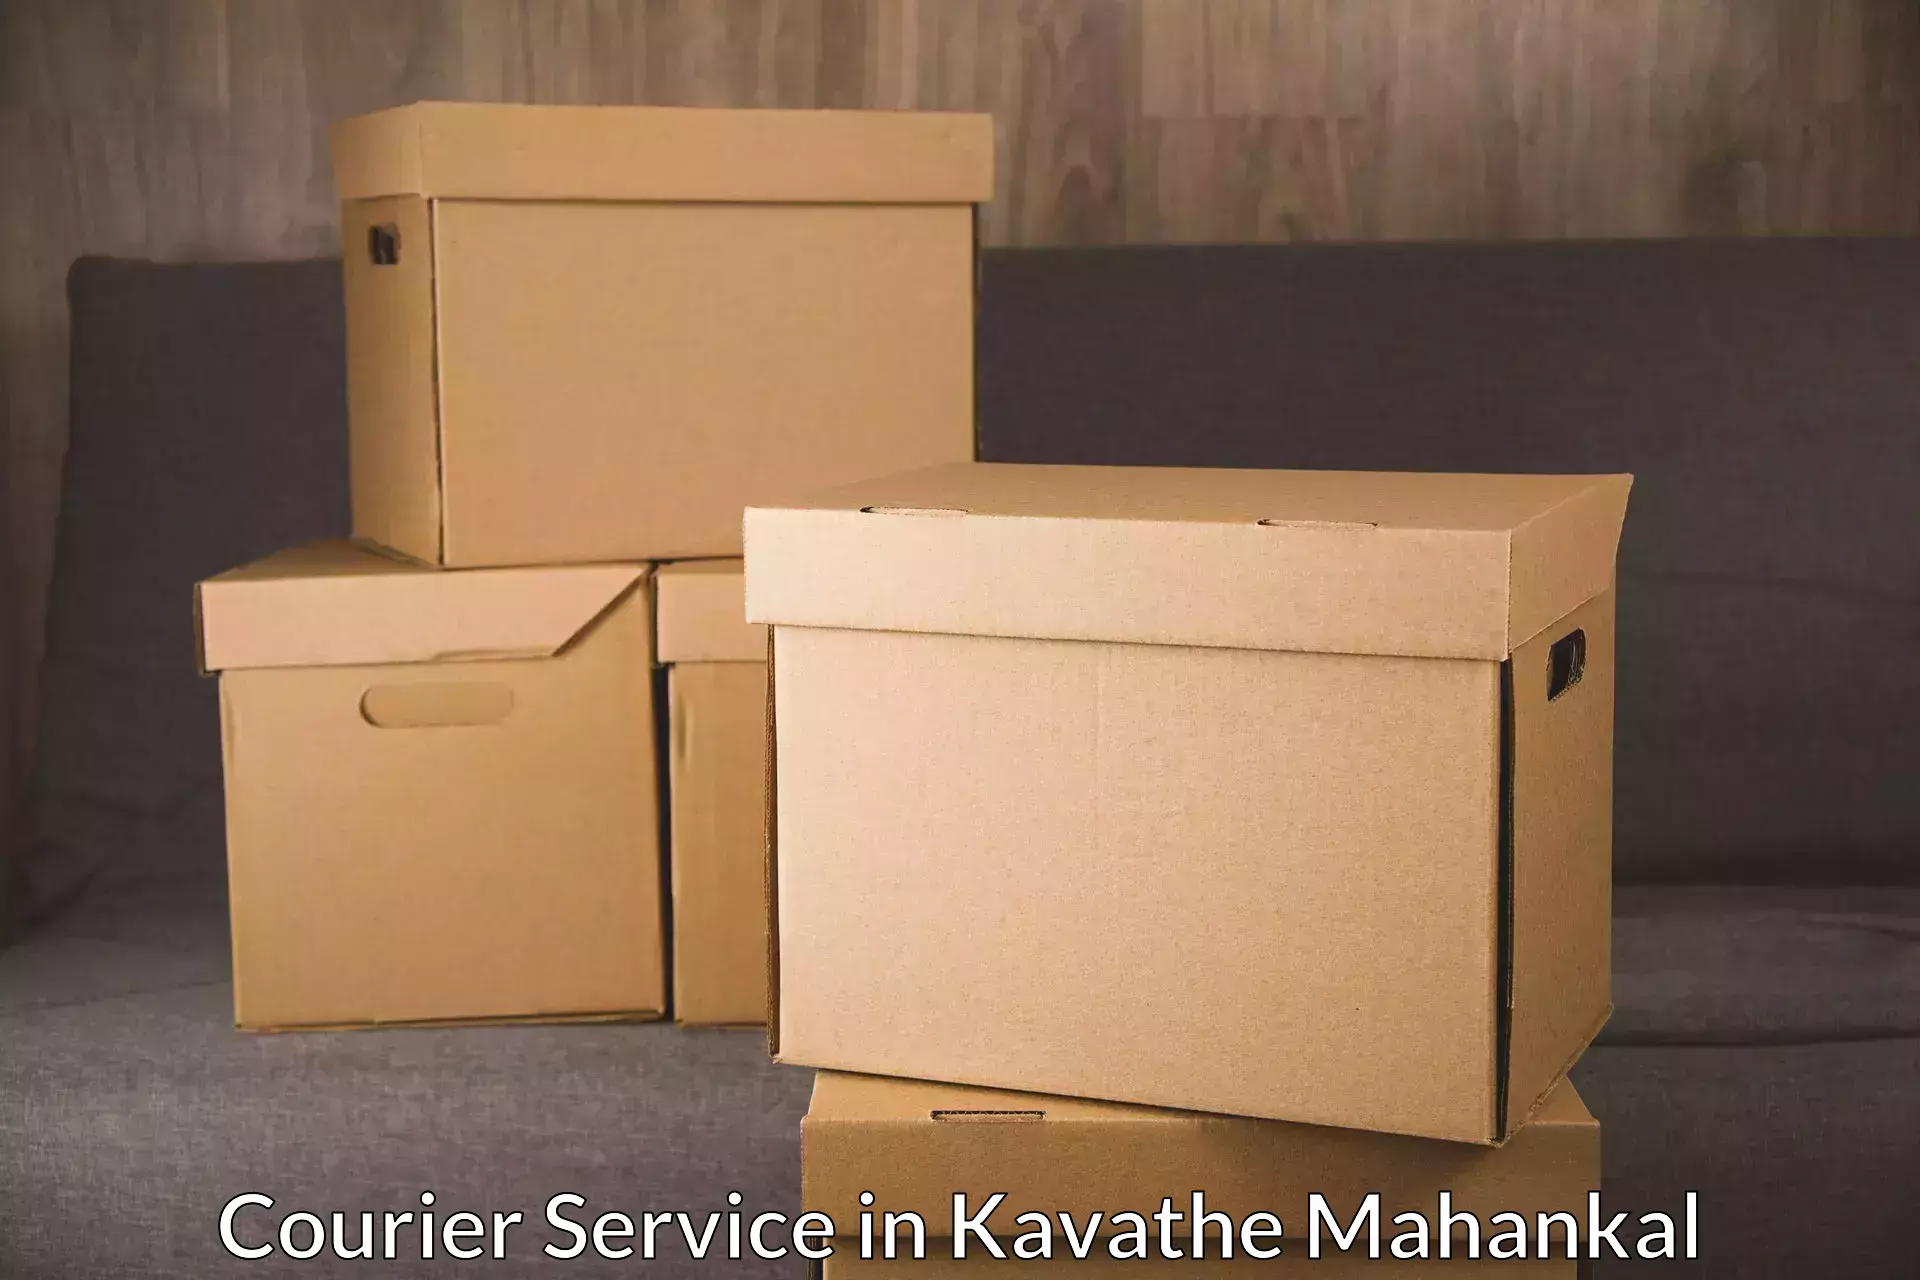 State-of-the-art courier technology in Kavathe Mahankal